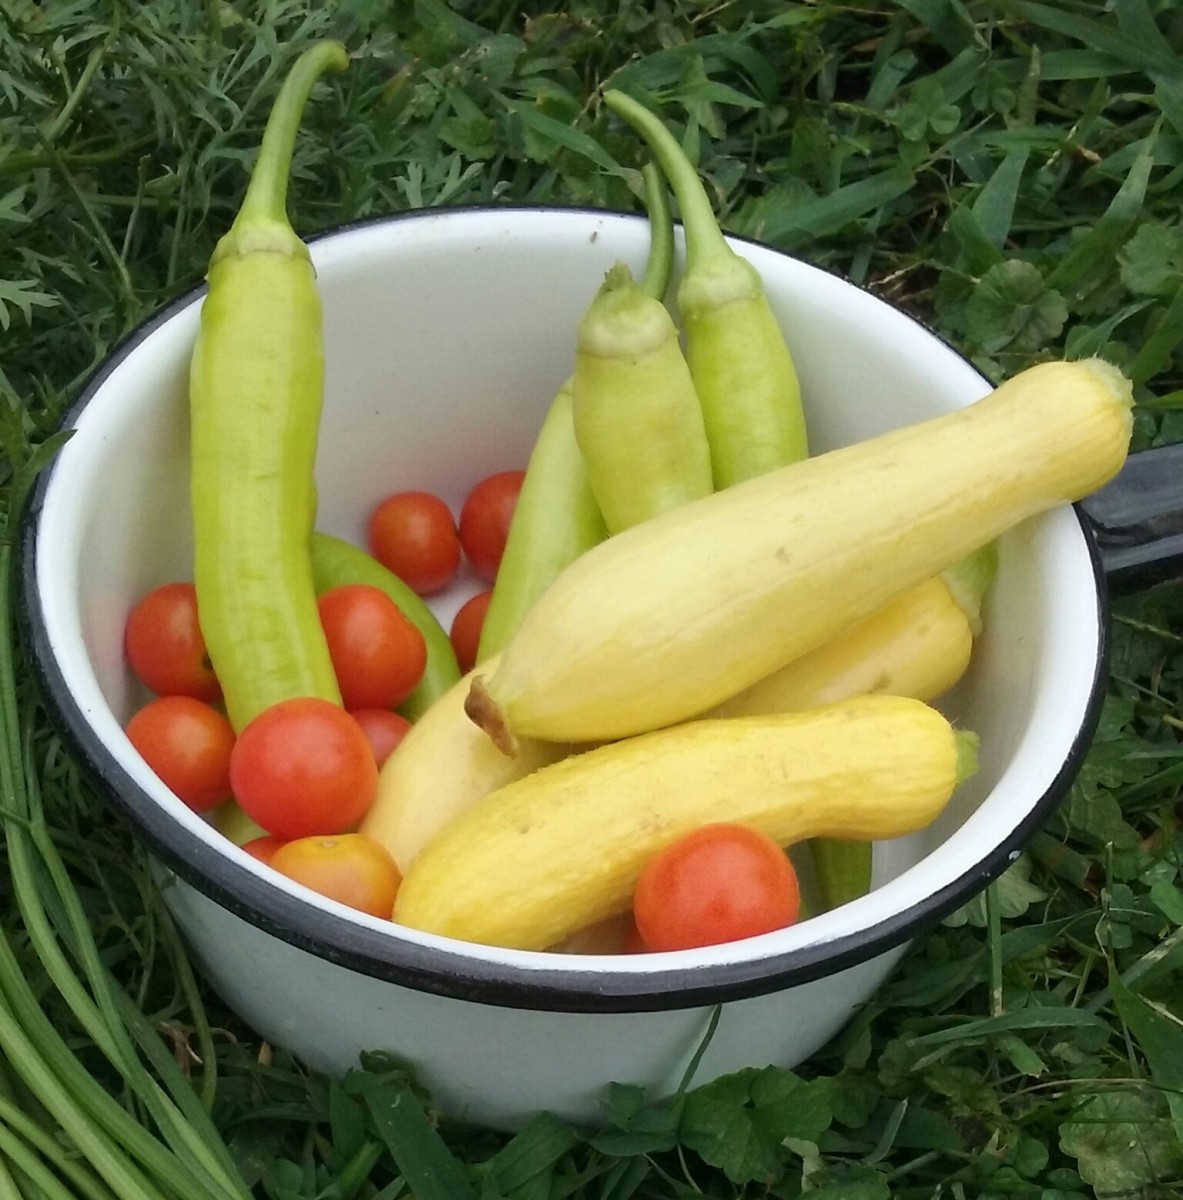 Here is a harvest from my backyard Climate Victory Garden. These tasted so good! In addition, they fed my soul knowing that I was helping the world. You can feel the same by learning how to make your own climate garden.